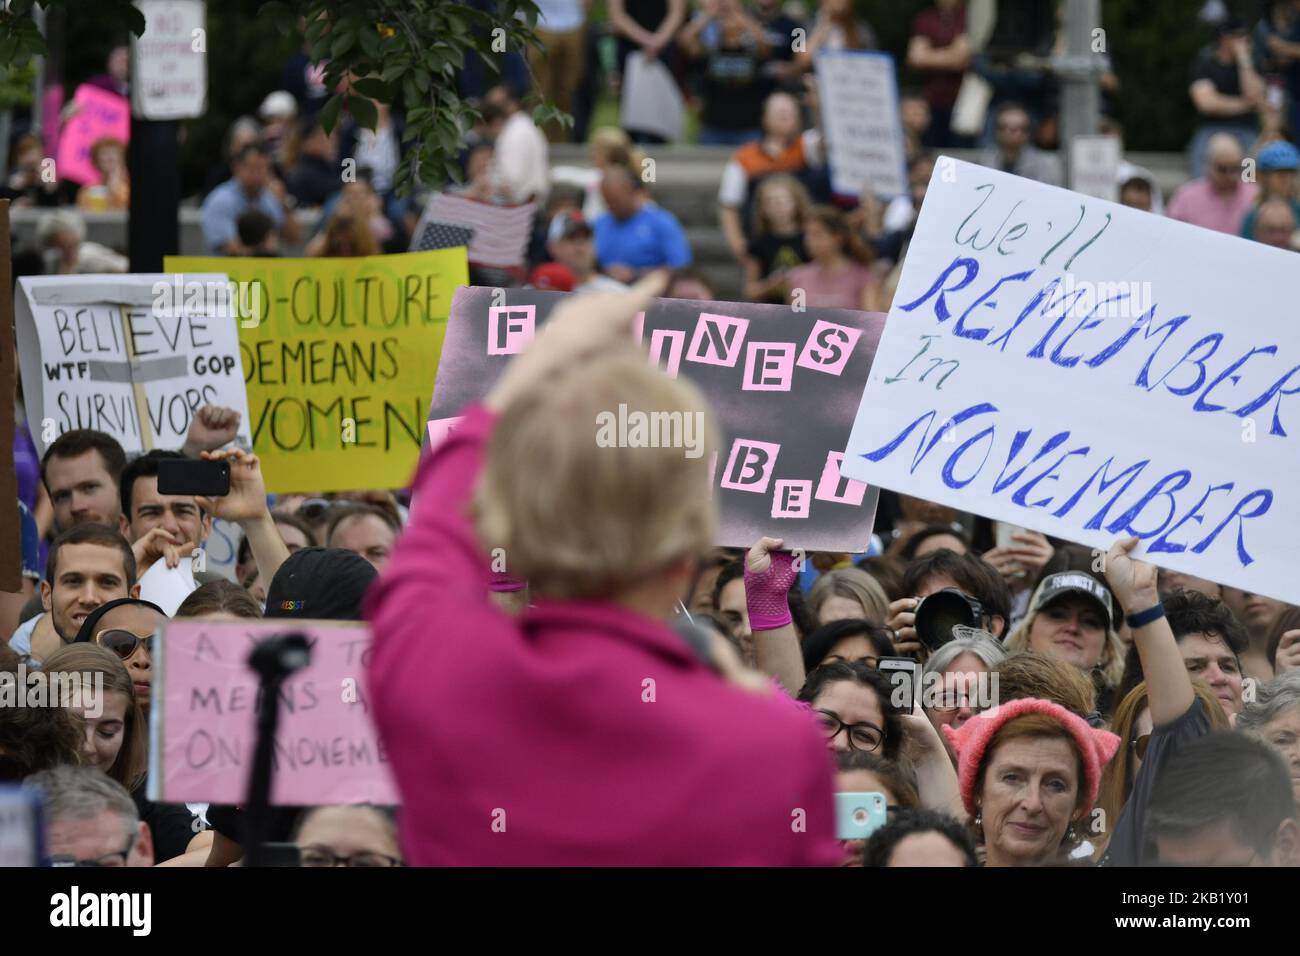 Sen. Elizabeth Warren (D, Mass.) speaks to protestors gathered at the steps of the US Supreme Court as the Nation waits for the expected confirmation Judge Brett Kavanaugh, in Washington, D.C., on October 6, 2018. (Photo by Bastiaan Slabbers/NurPhoto) Stock Photo